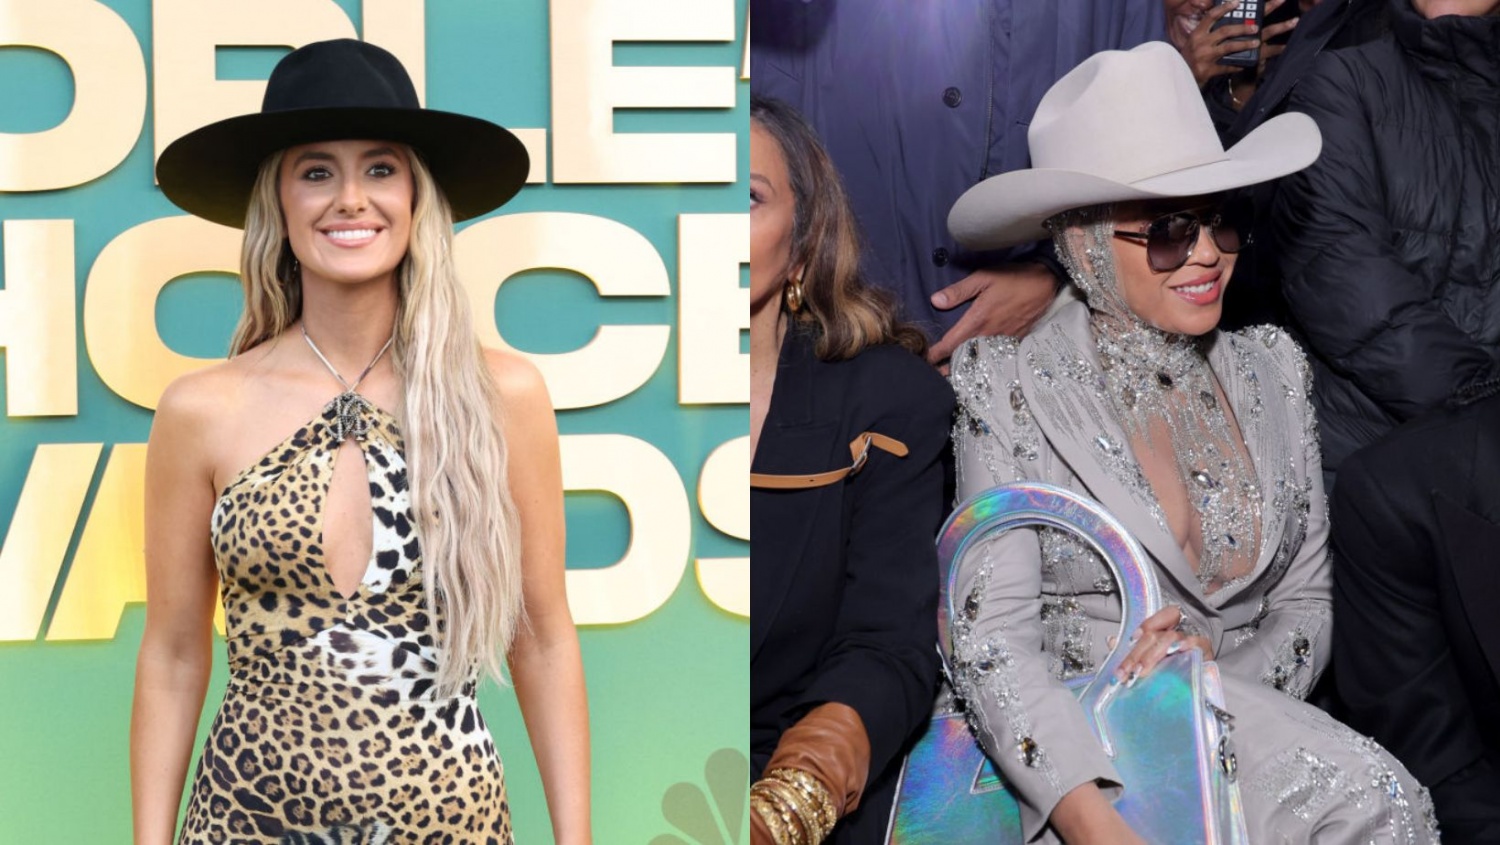 Lainey Wilson Welcomes Beyoncé to Country Music by Giving Her Tips